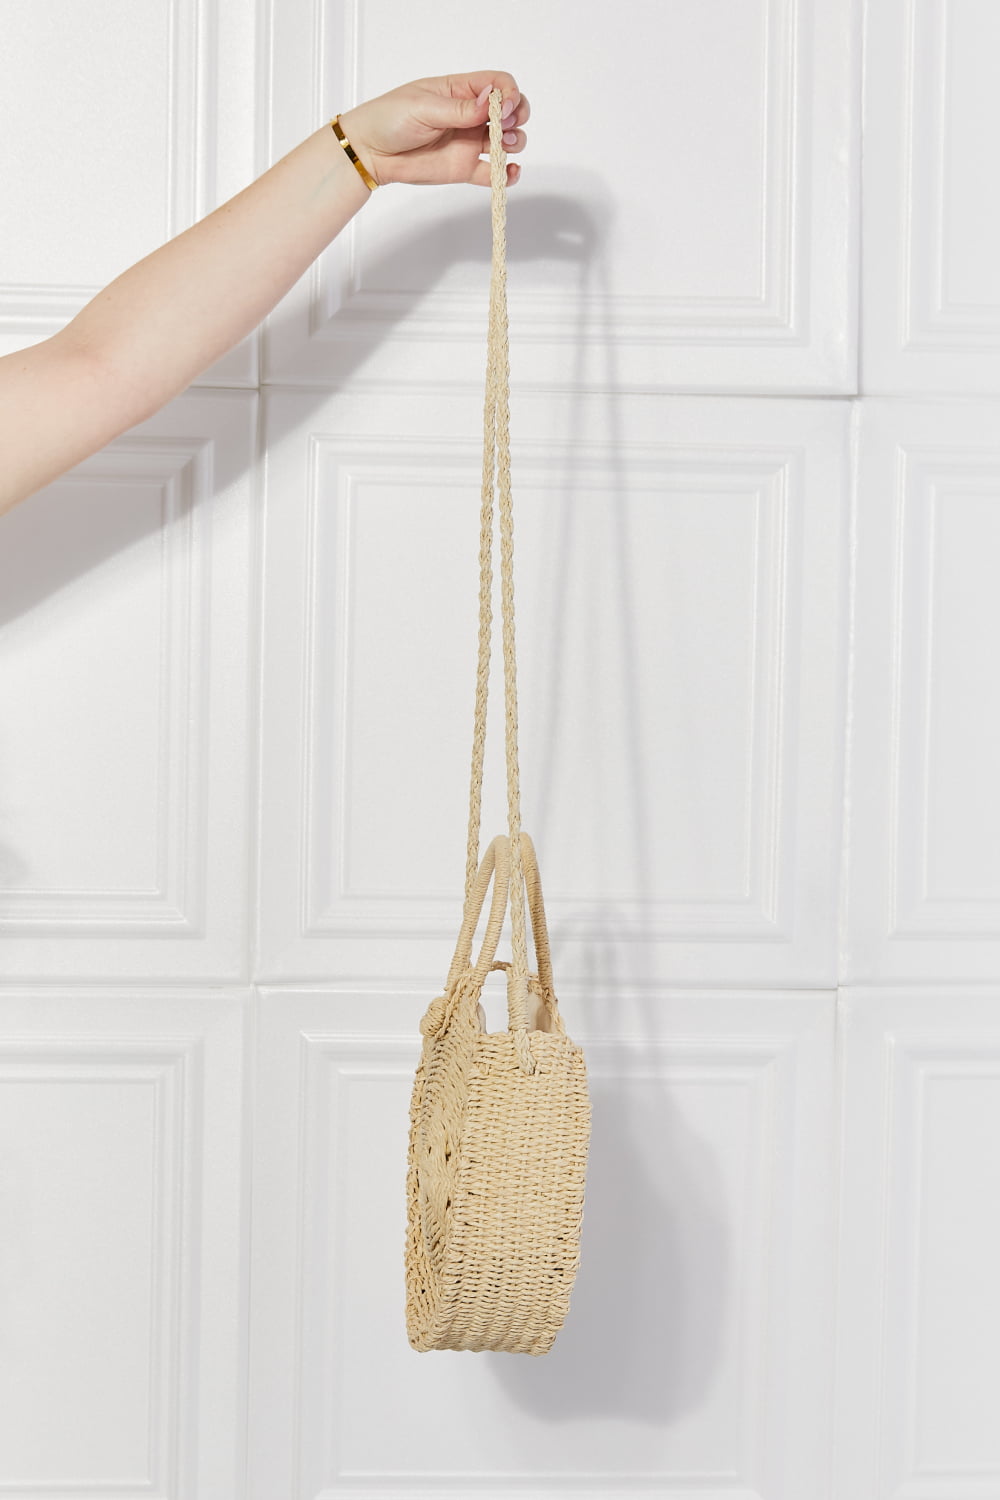 ONLINE EXCLUSIVE Justin Taylor Feeling Cute Rounded Rattan Handbag in Ivory